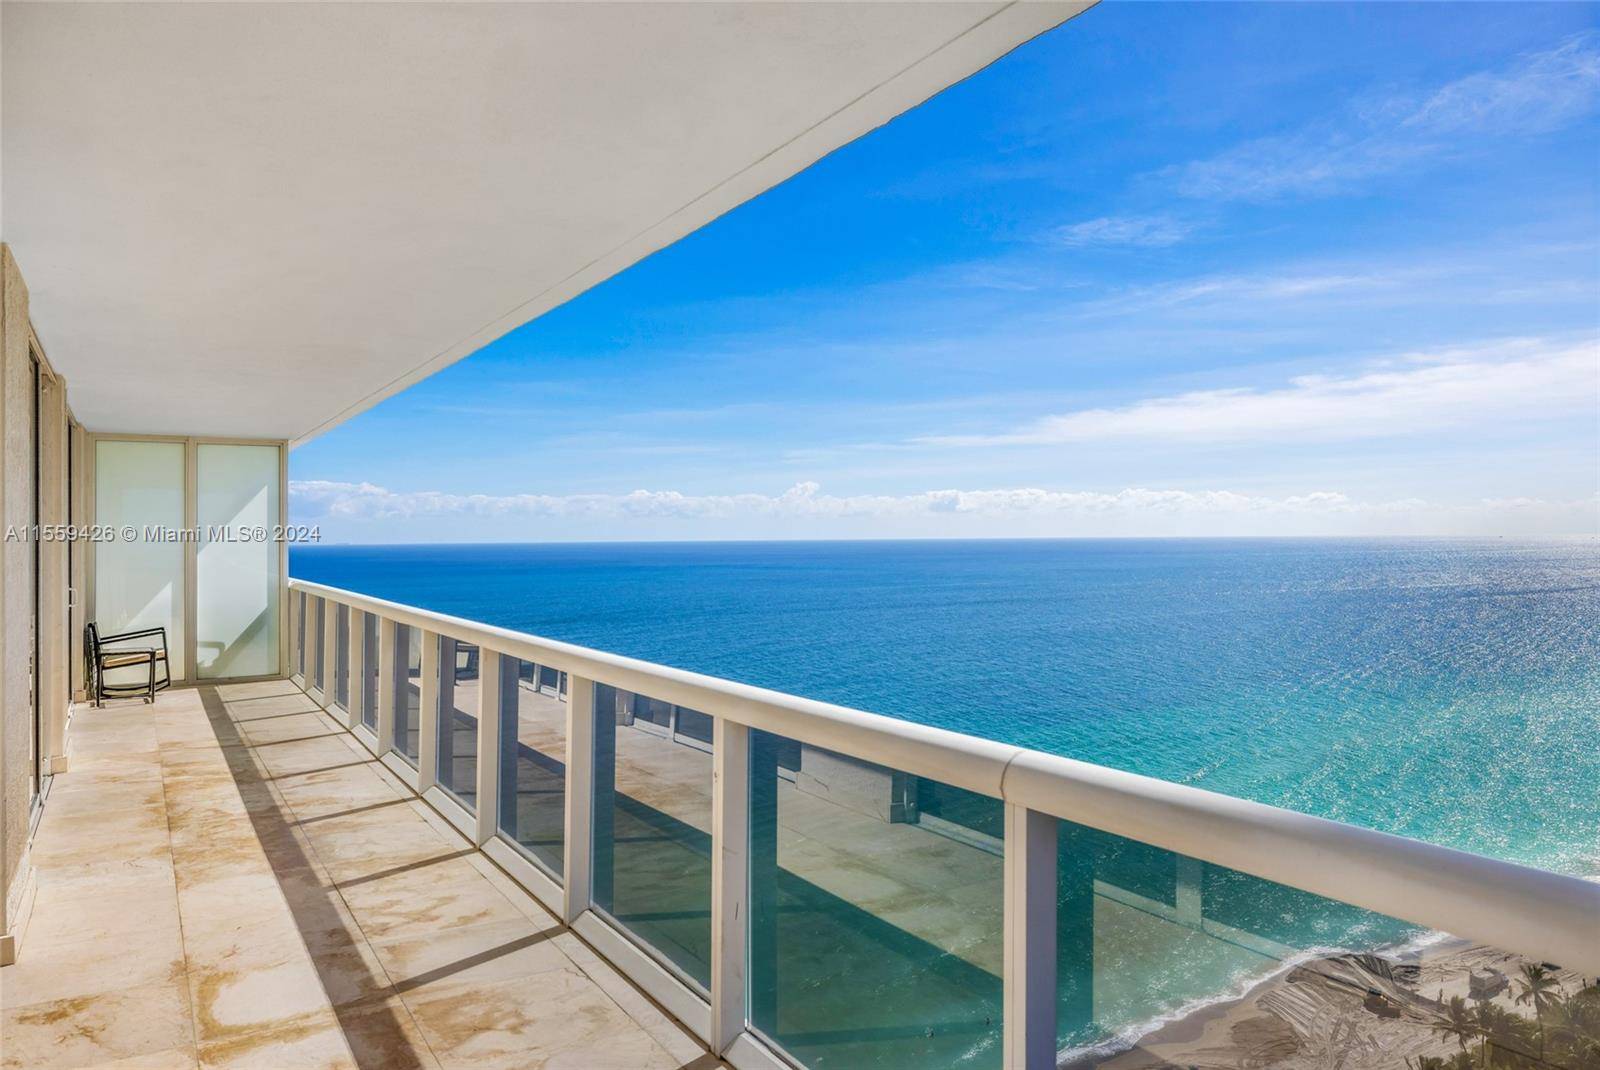 This 2 bed 2 bath apartment is located on the corner of a building, offering breathtaking views of both the city and the ocean.